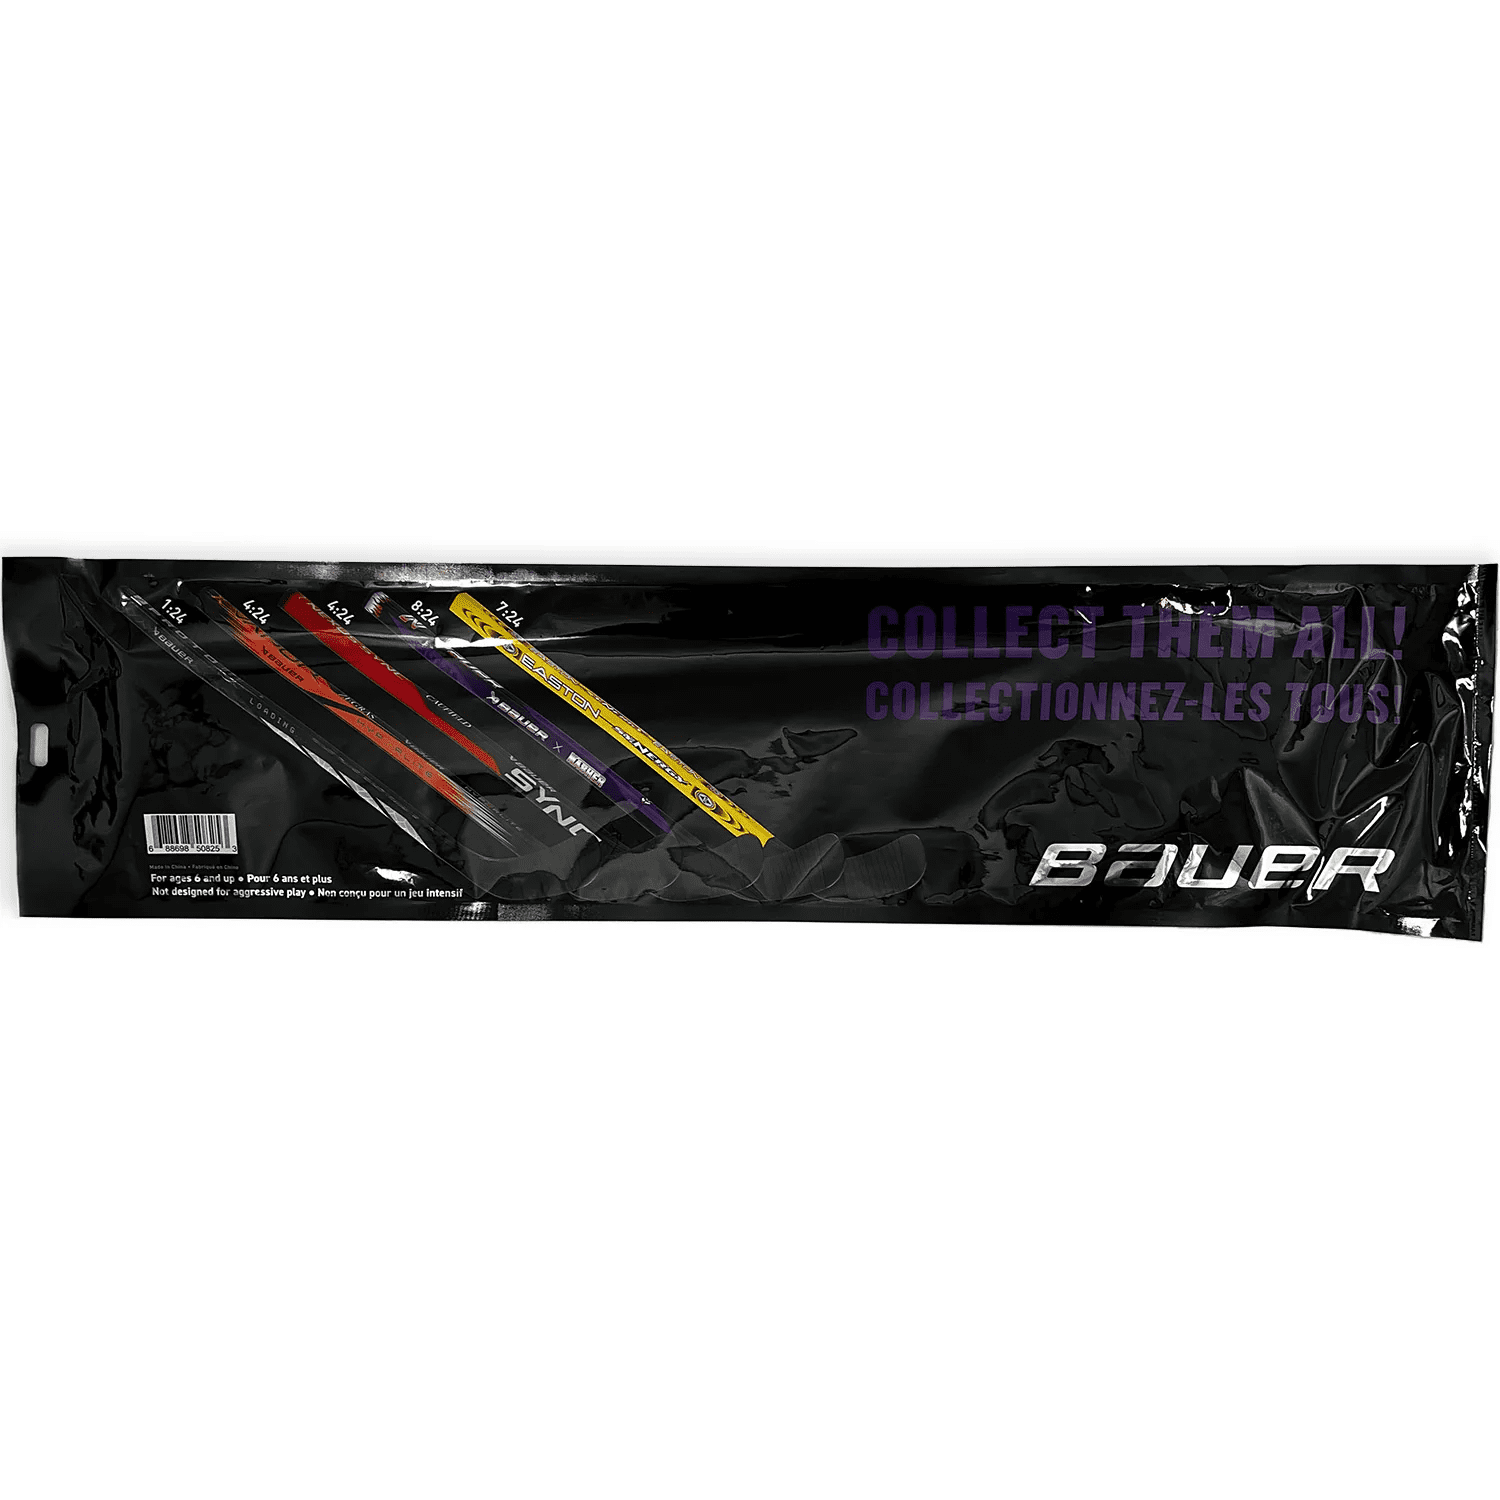 Discount Hockey on X: Bauer Mystery Mini Sticks now available at   Quantities Limited, Get Yours Today HERE:   #hockey #youthHockey #bauer #sticks #mystery   / X